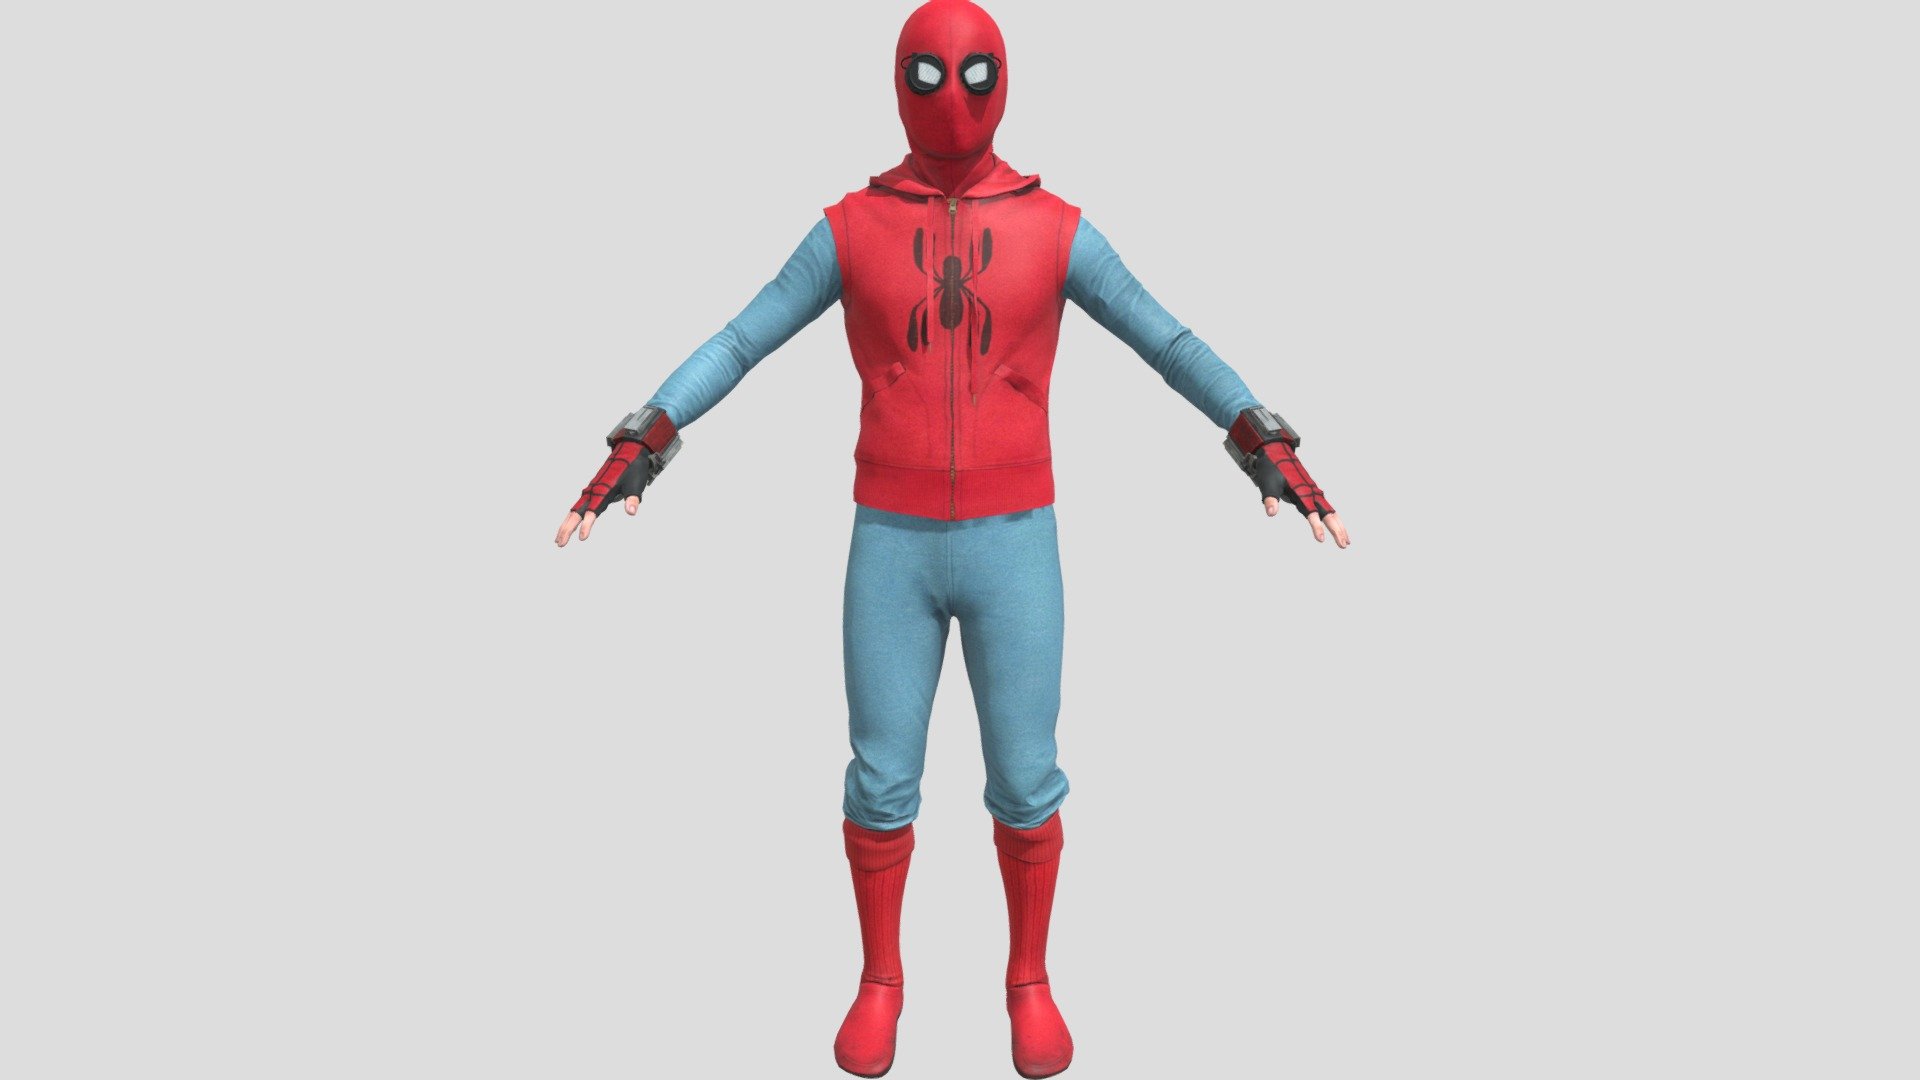 👉This Model Is Available To Download Please Click On The Link Above and Download From It, TO SUPPORT ME.   HUMBLE REQUEST❤

This Is Cyborg Spiderman version This Model Is Well Textured or Rigged You can Download It And Can Use On Your Animations

File Format : 
•FBX
•PNG - Spiderman Homemade(Textured)(Rigged) - 3D model by CAPTAAINR 3d model